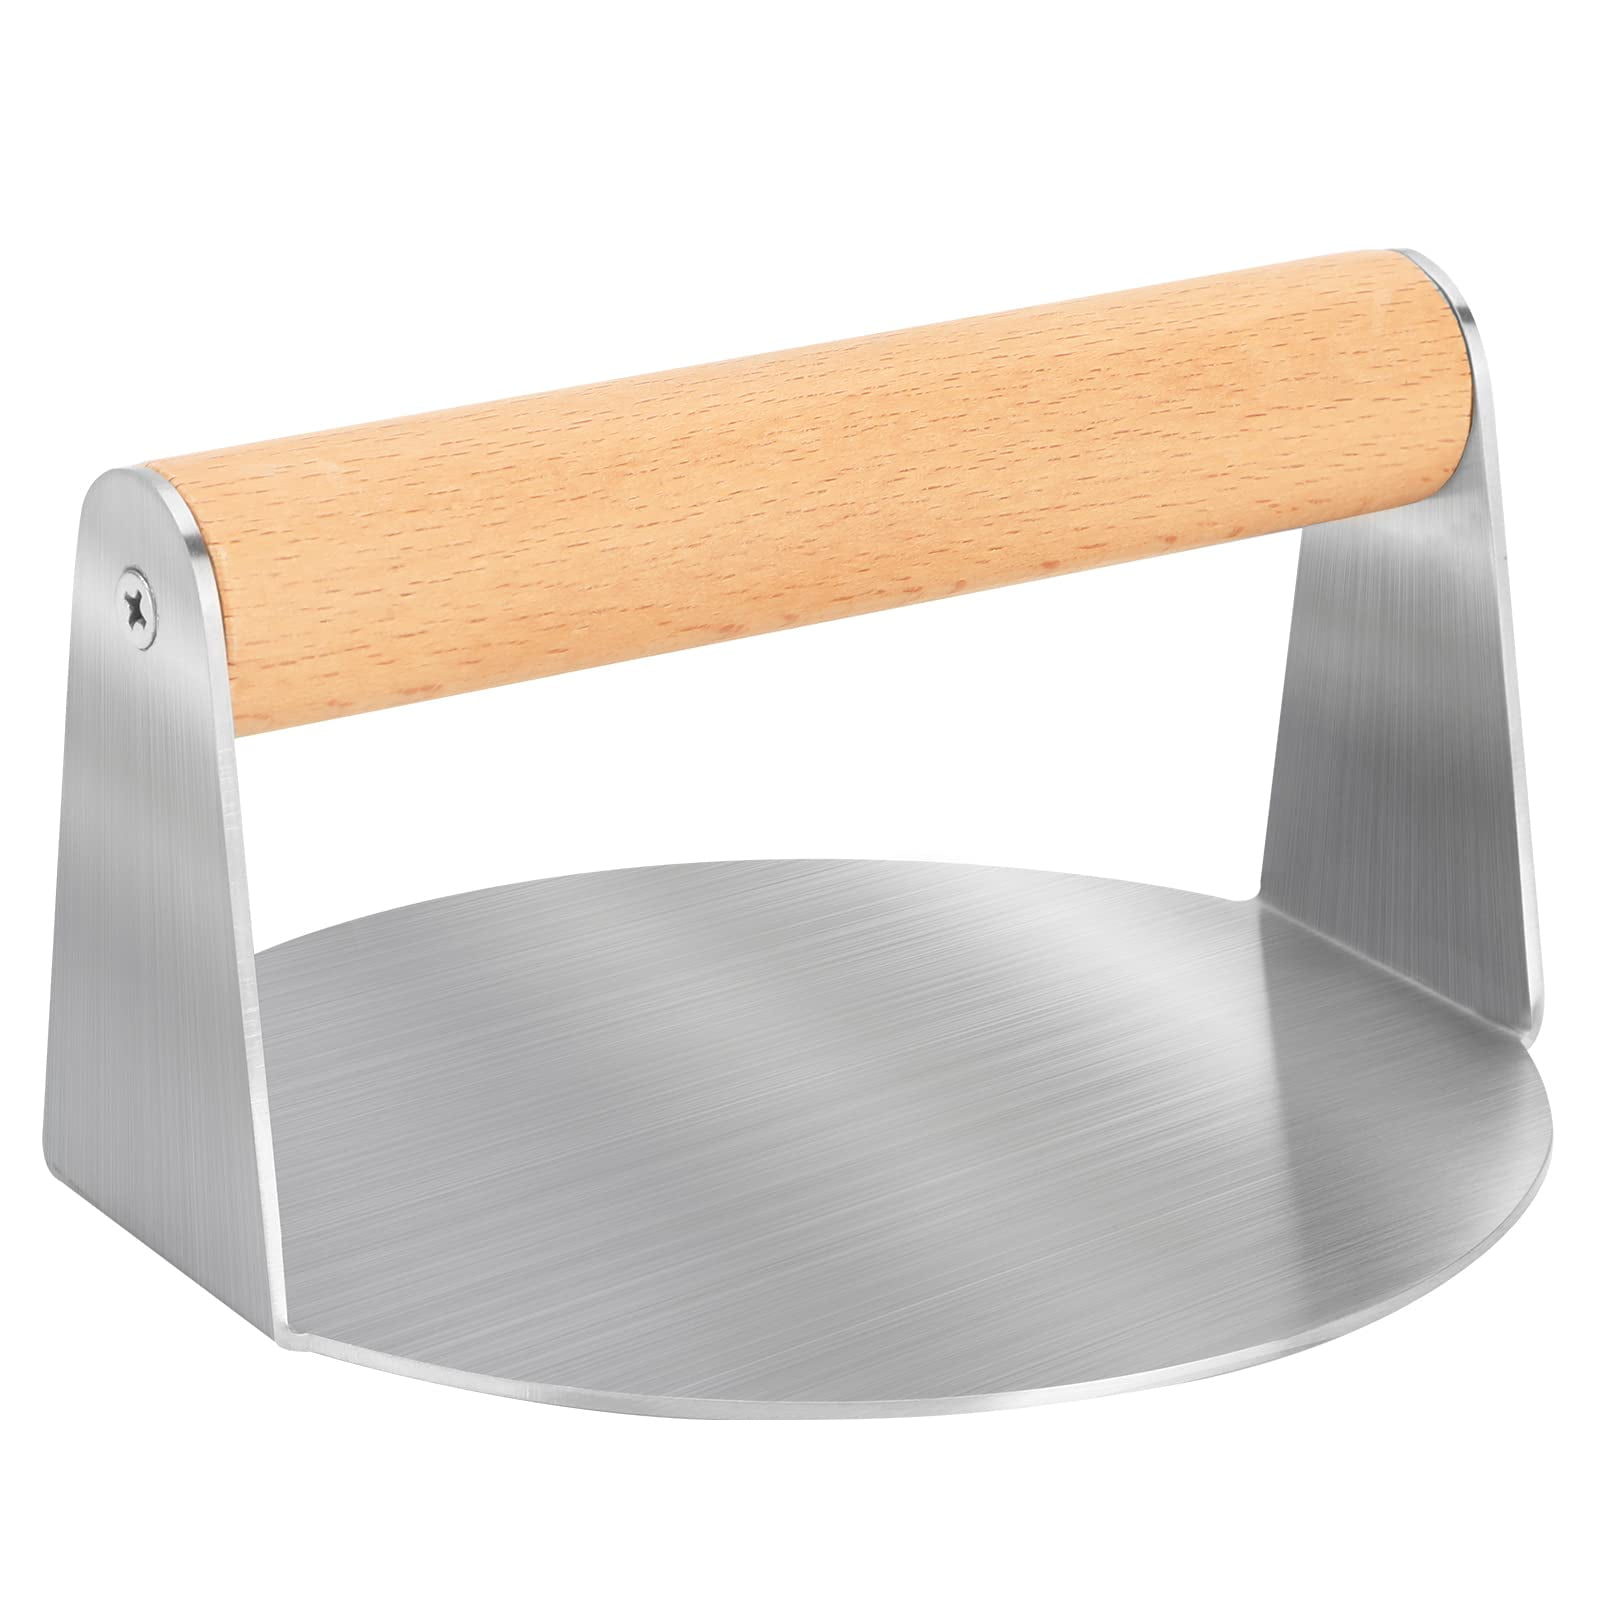  RUSFOL Large Stainless Steel Grill Smasher with a Stainless  Steel Griddle Spatula, Heavy Duty Bacon Press,Wooden Handle Burger Smasher,  No Rust,Easy to Maintain&Use, Good for Indoor&Outdoor use : Patio, Lawn 